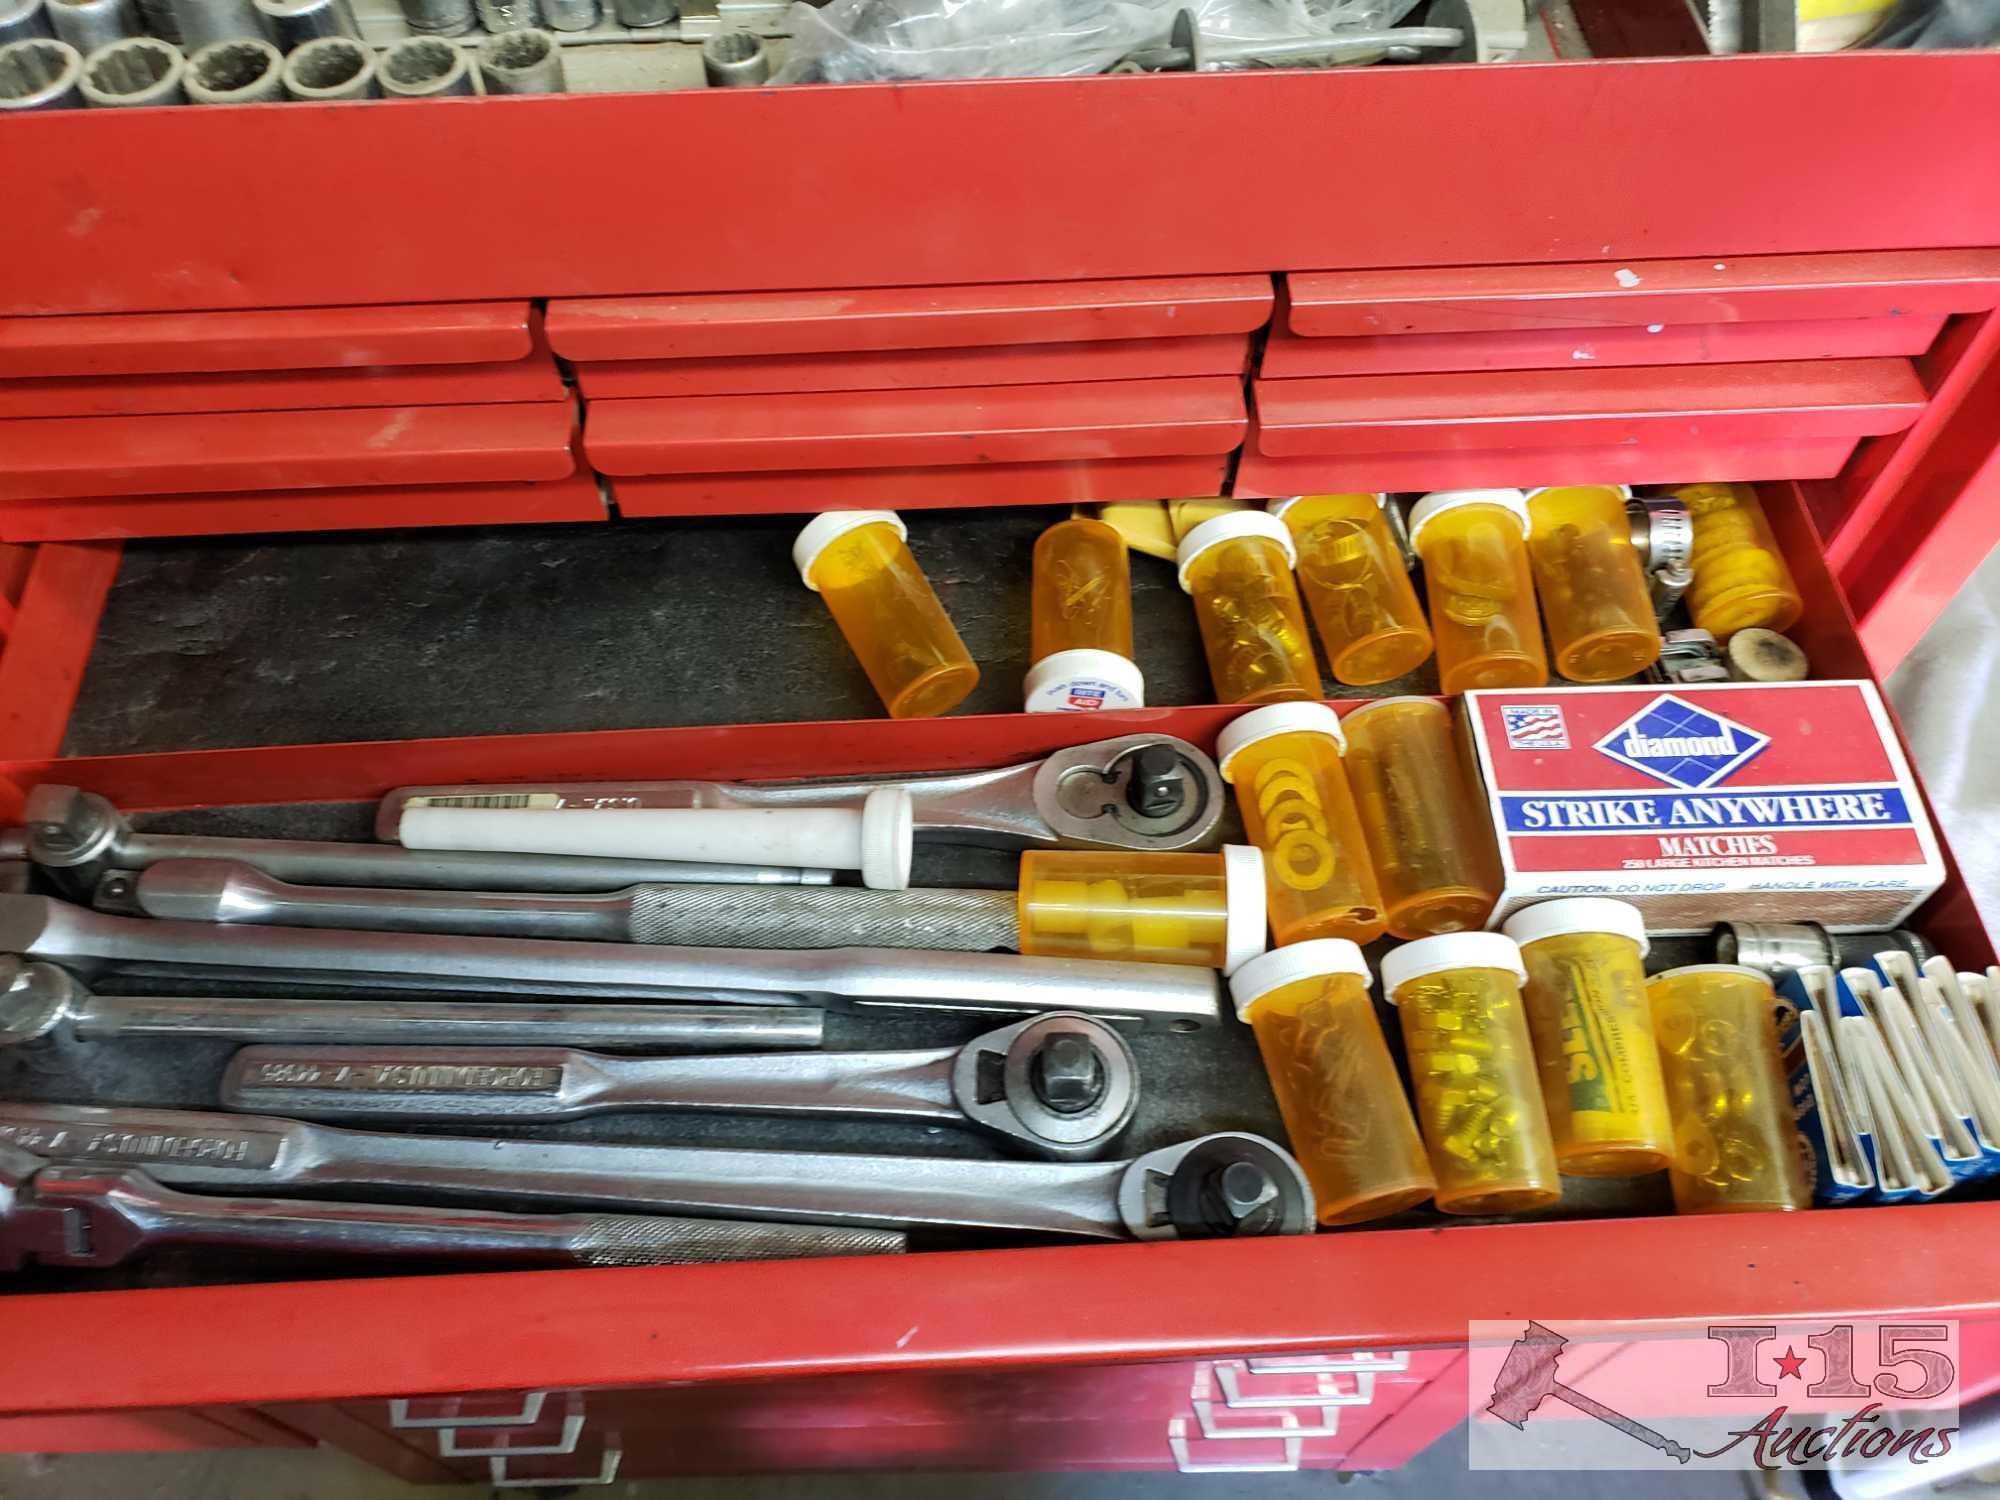 Rolling Mac Tool Box with Snap-on Top Box and Two Side Boxes Full of Tools